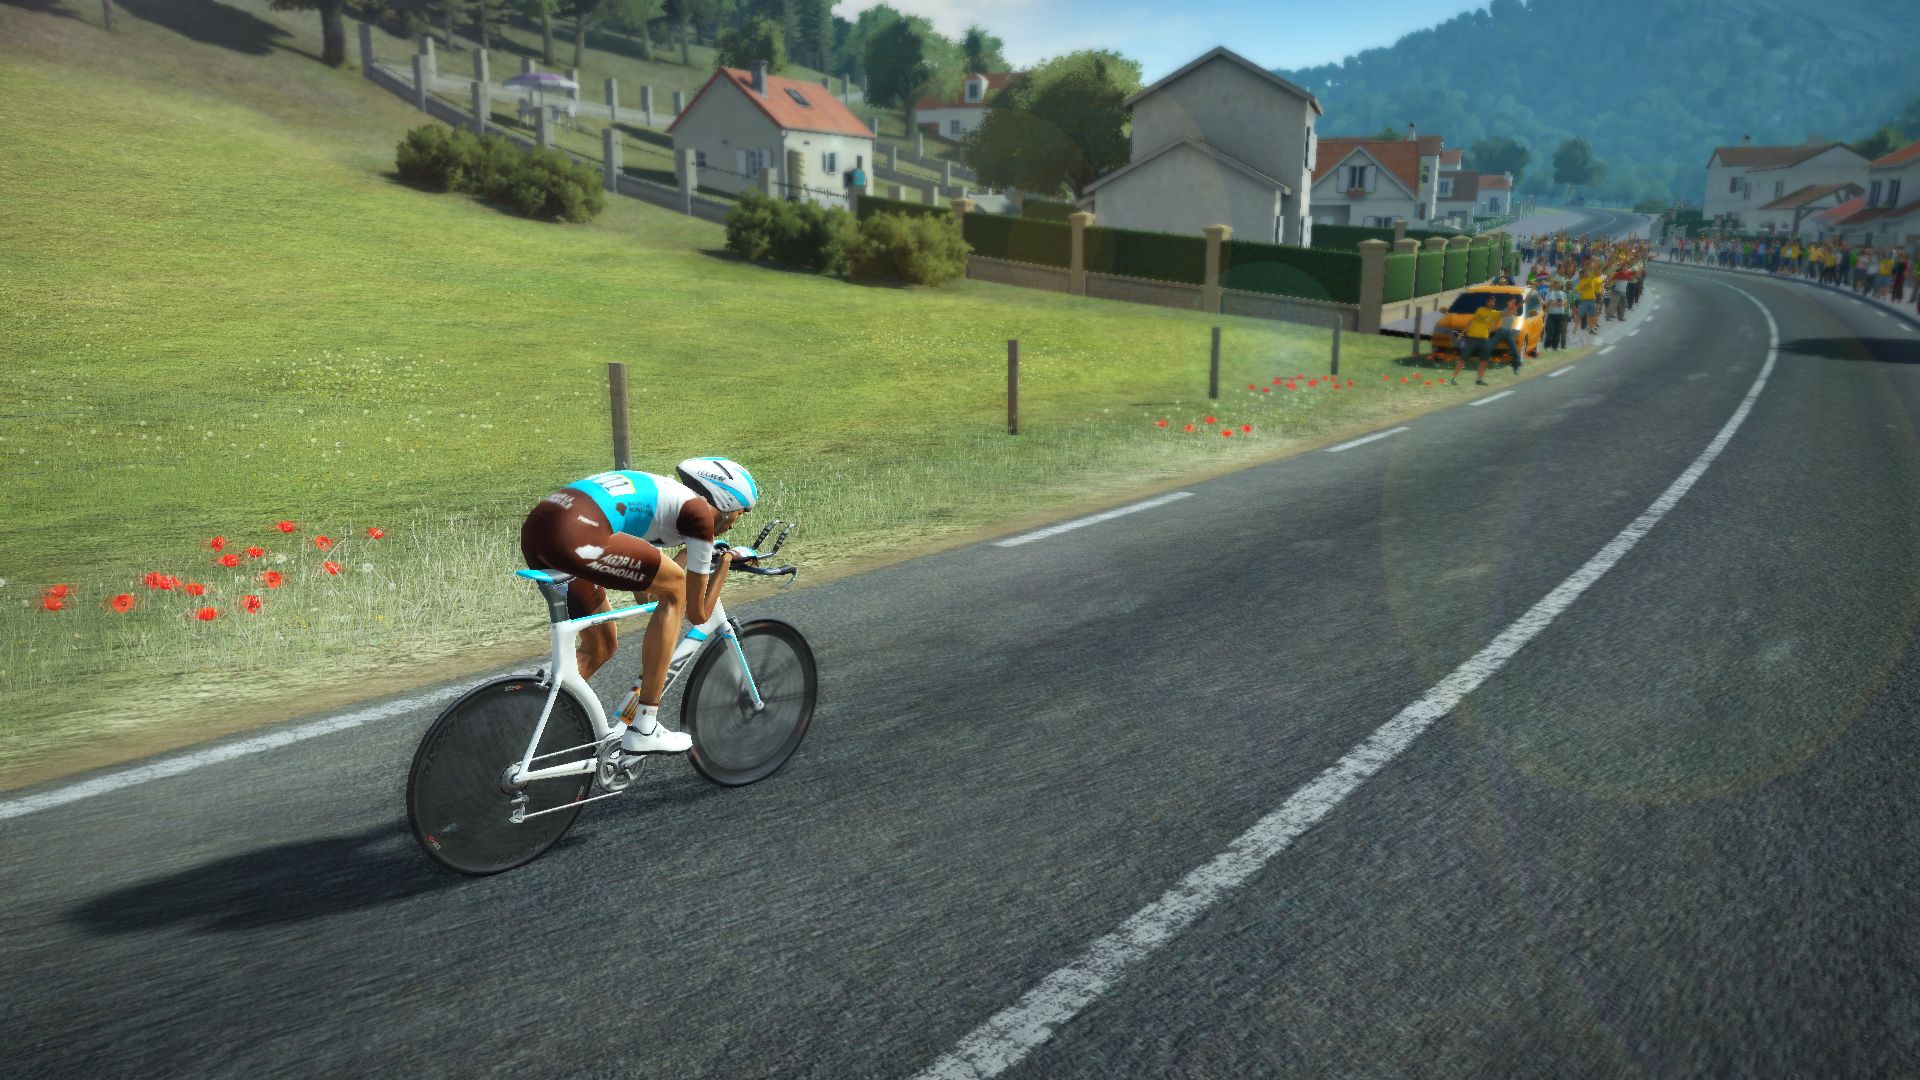 PRO CYCLING MANAGER 2020 — .